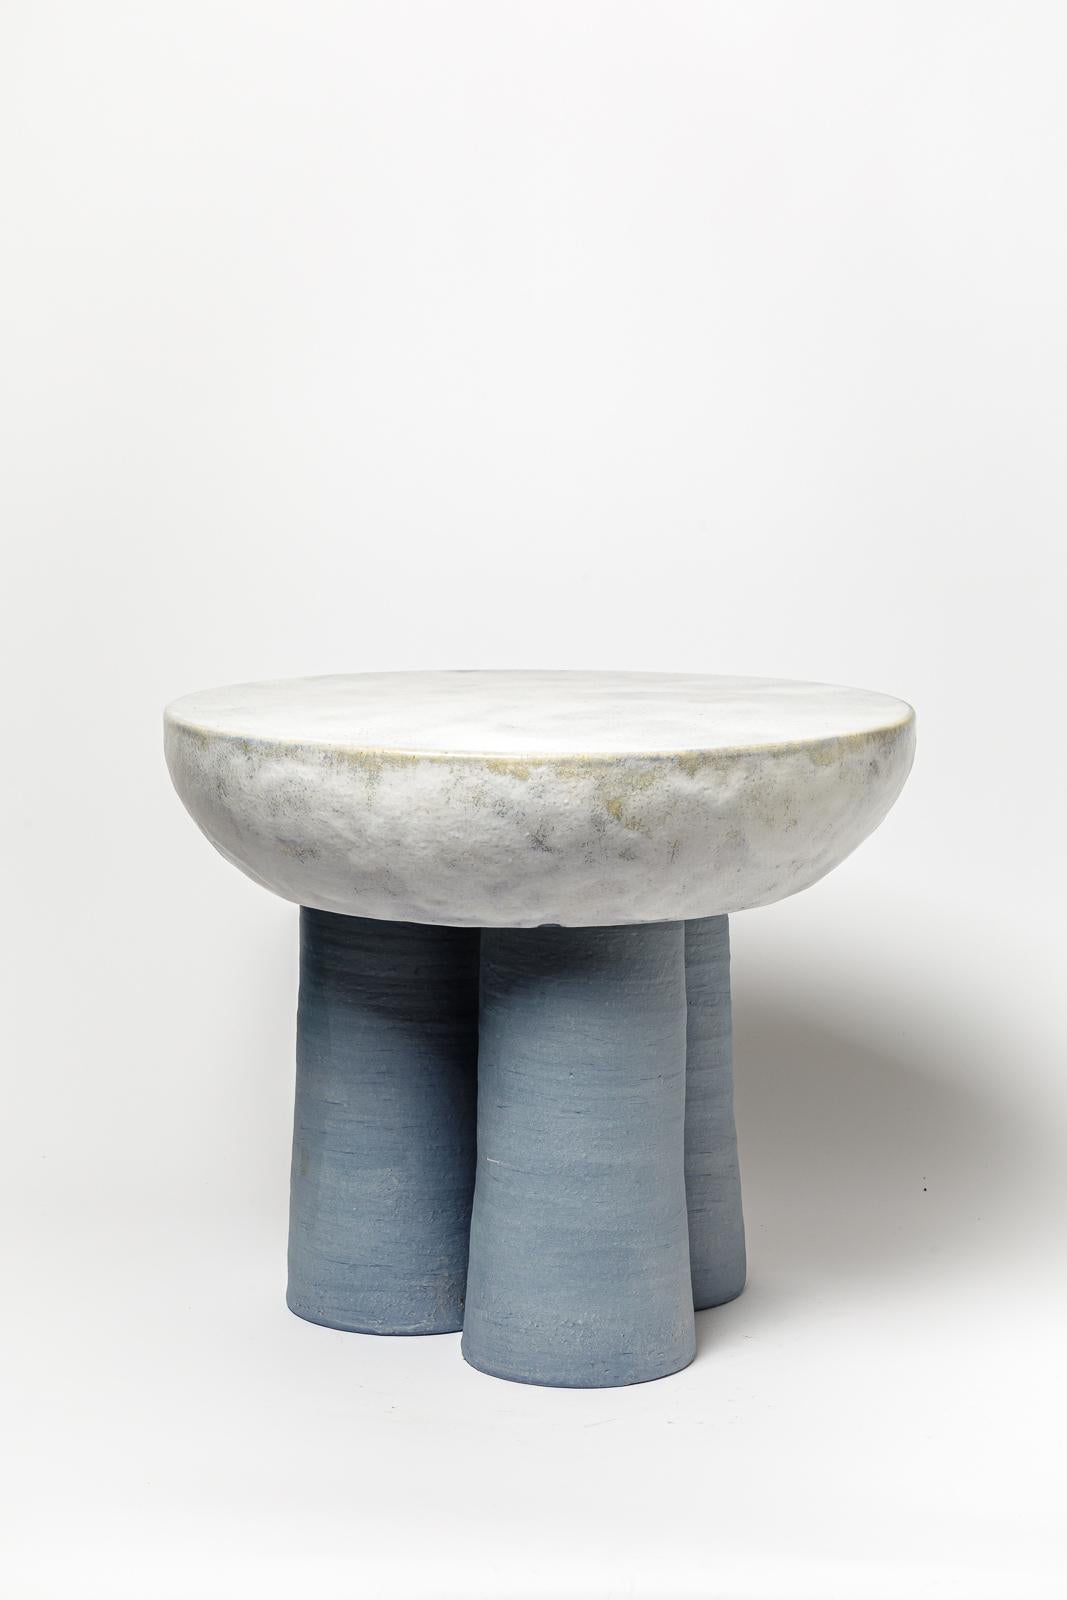 French Blue and yellow glazed ceramic stool or coffee table by Mia Jensen, 2023. For Sale